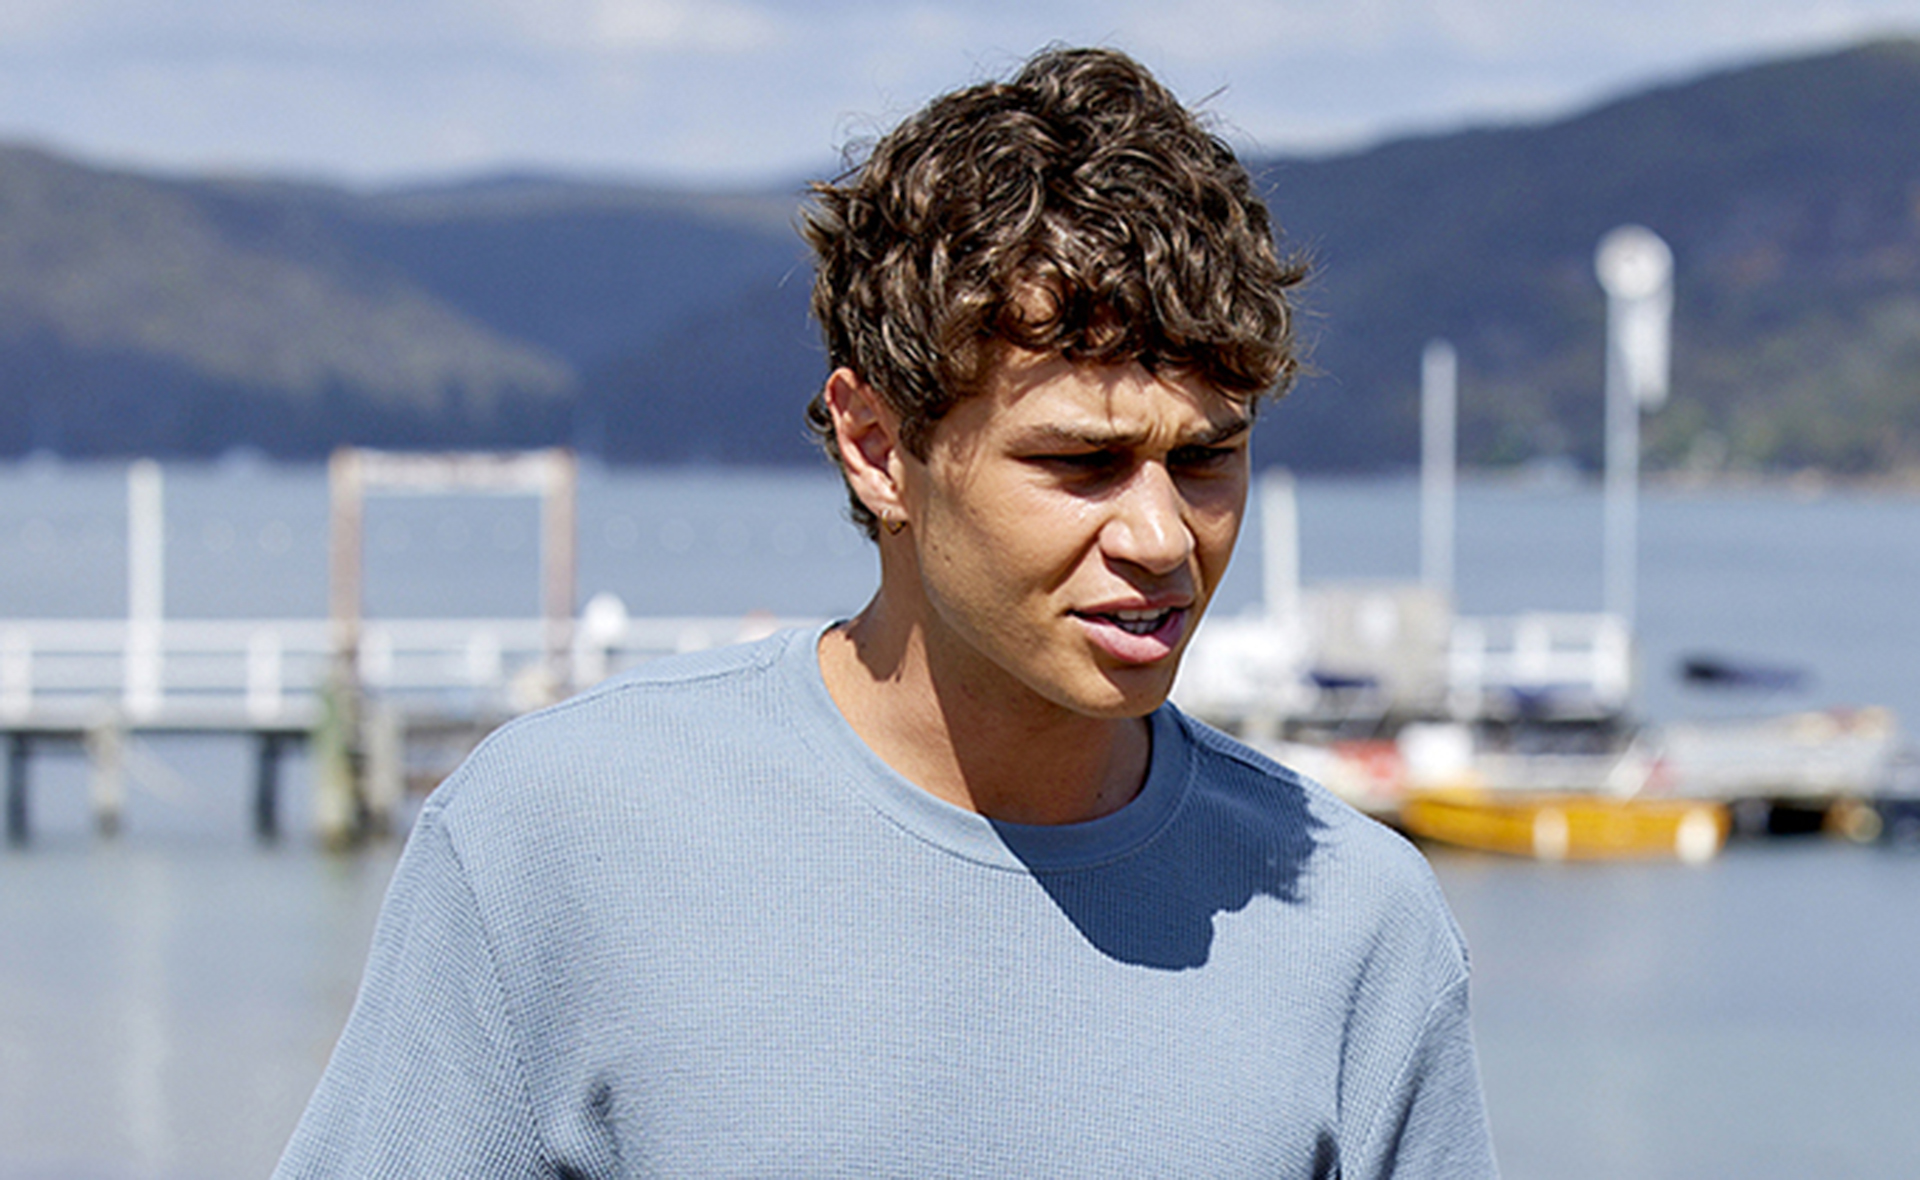 Home and Away’s Theo stands up to his father following years of abuse: “Get out of my life!”